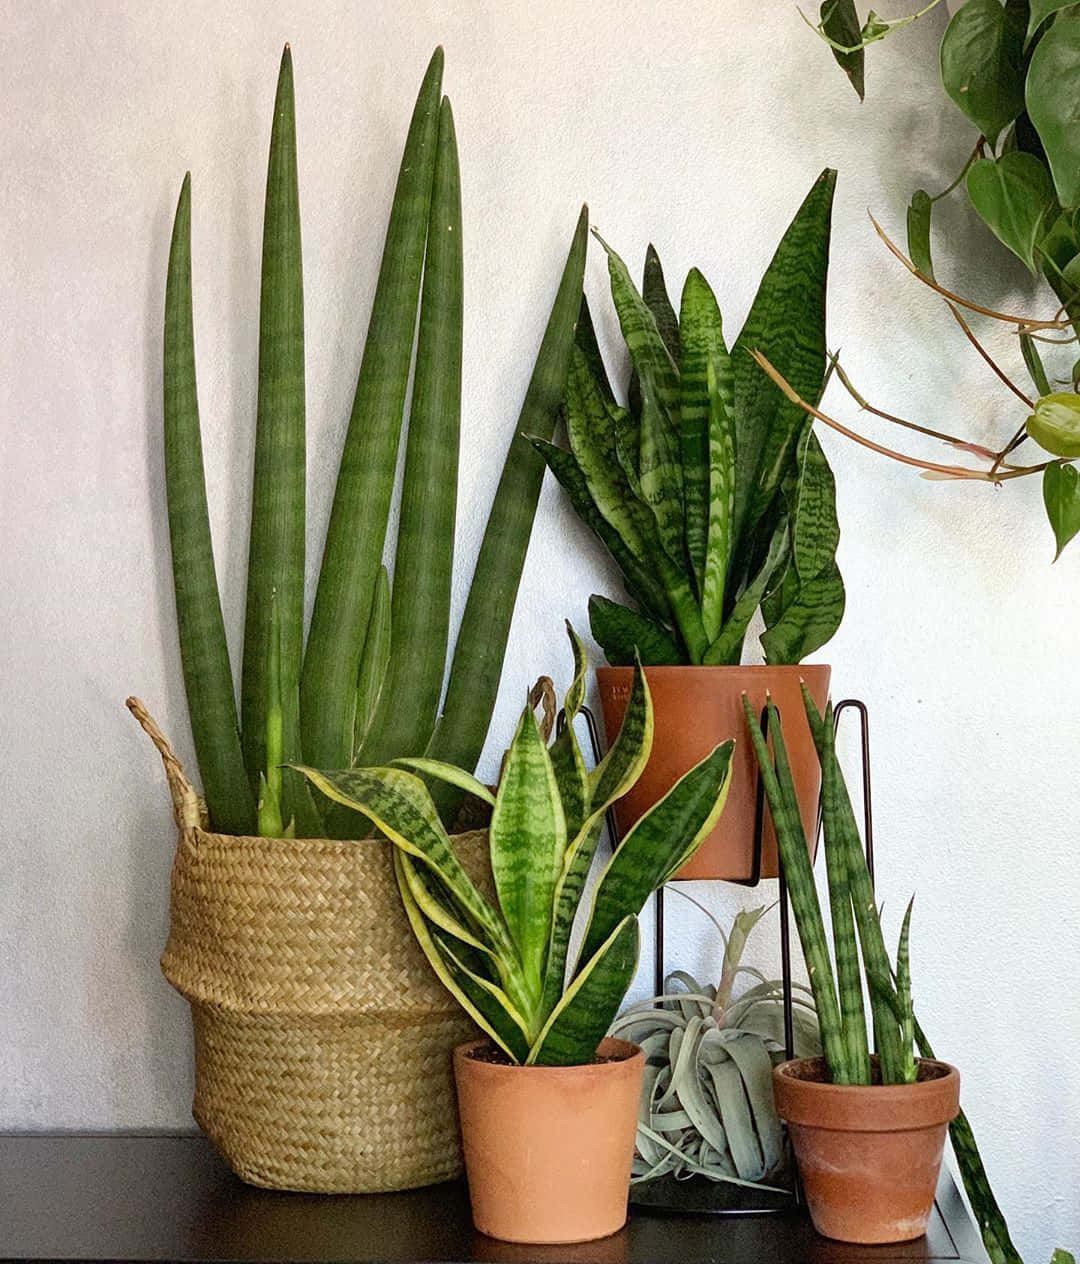 Choose stylish and low maintenance greenery with a Snake Plant